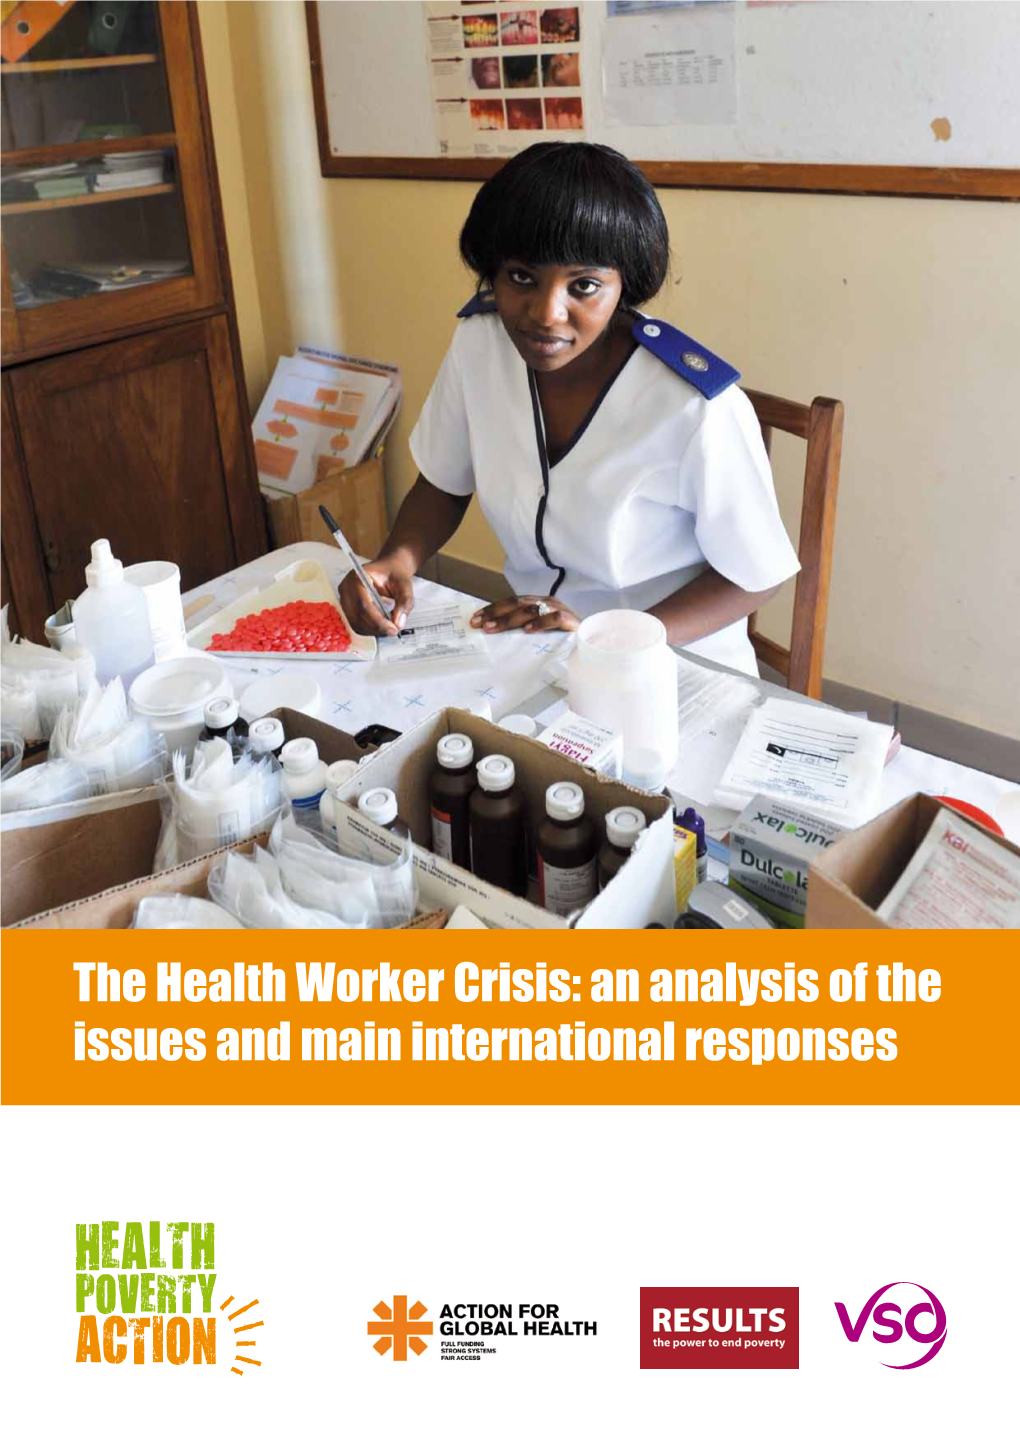 The Health Worker Crisis: an Analysis of the Issues and Main International